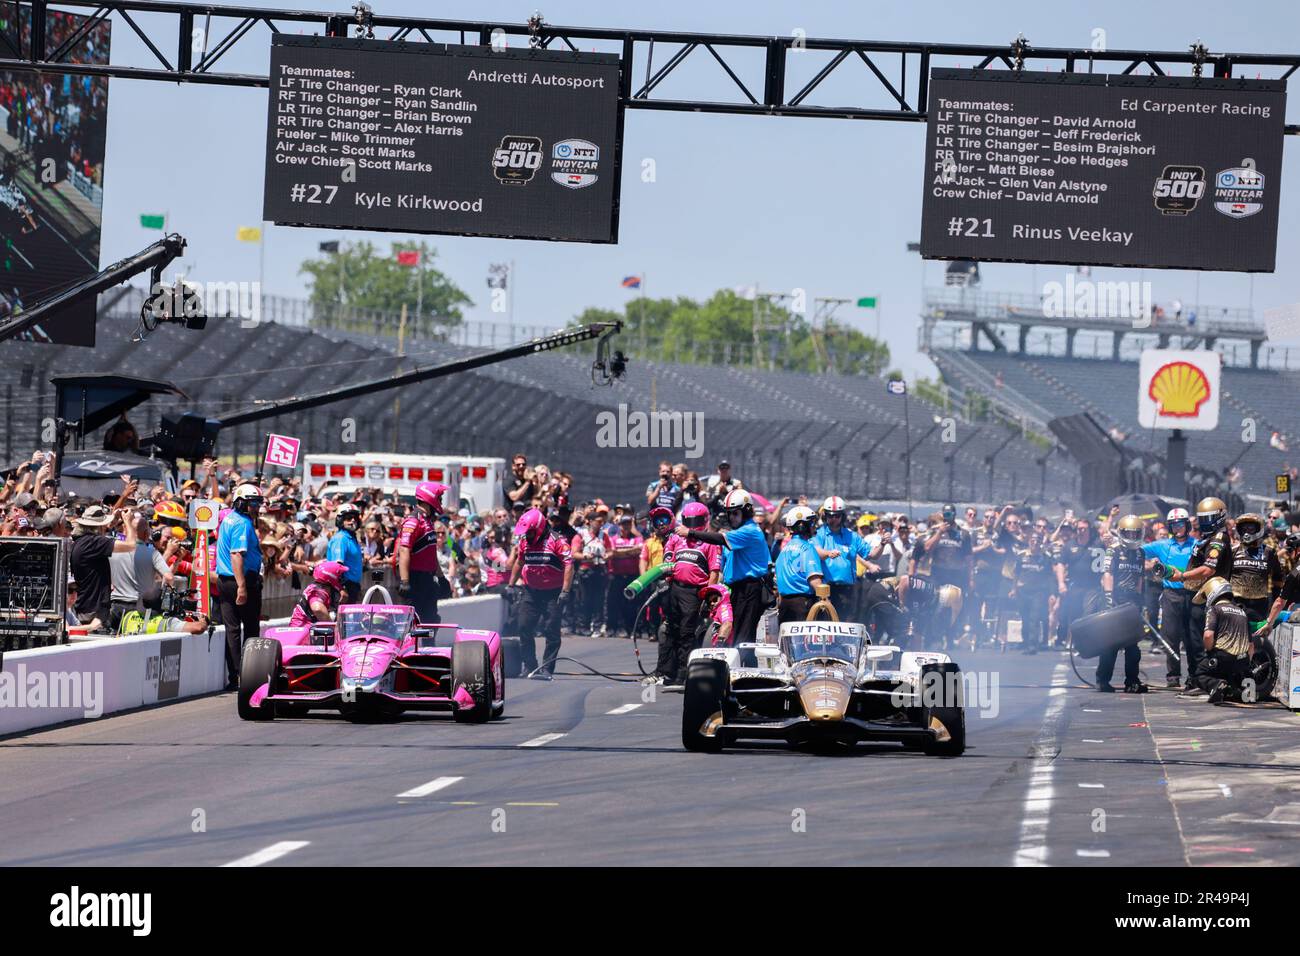 Indianapolis, USA. 26th May, 2023. INDIANAPOLIS, INDIANA - MAY 26: Ed Carpenter Racing driver Rinus VeeKay (21) of Netherlands and driver Kyle Kirkwood (27) of United States participate in the pit stop competition on Carb Day before the 2023 Indy 500 at Indianapolis Motor Speedway on May 26, 2023 in Indianapolis, Indiana. Credit: Jeremy Hogan/Alamy Live News Stock Photo